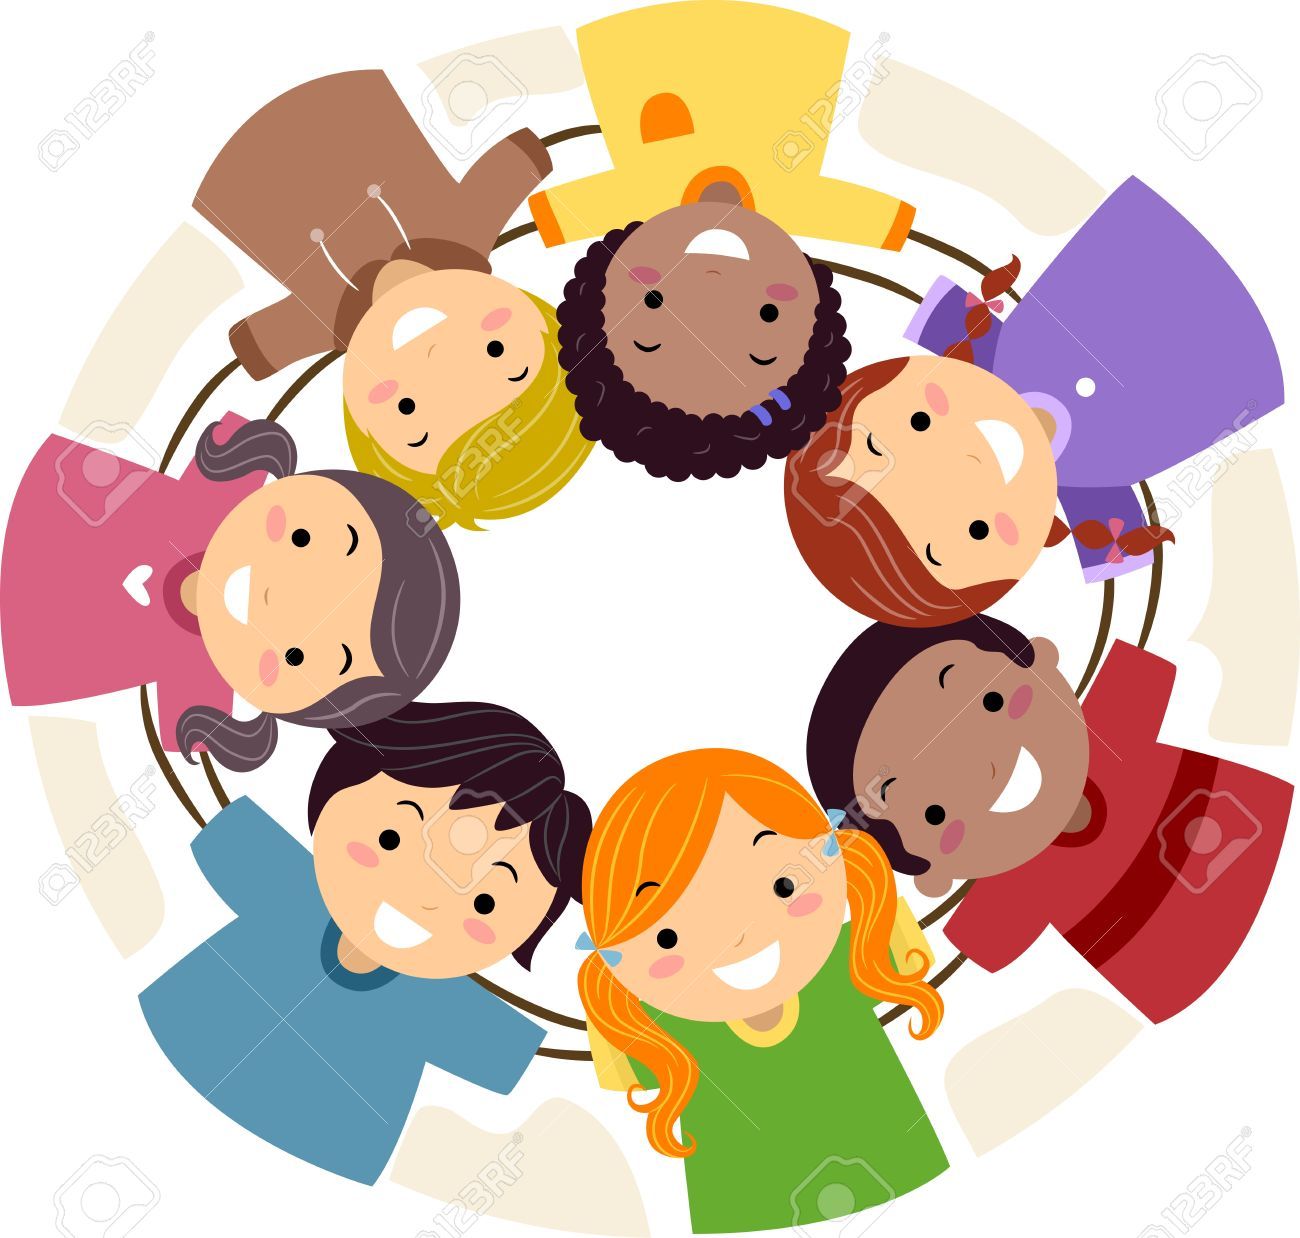 daycare clipart group work